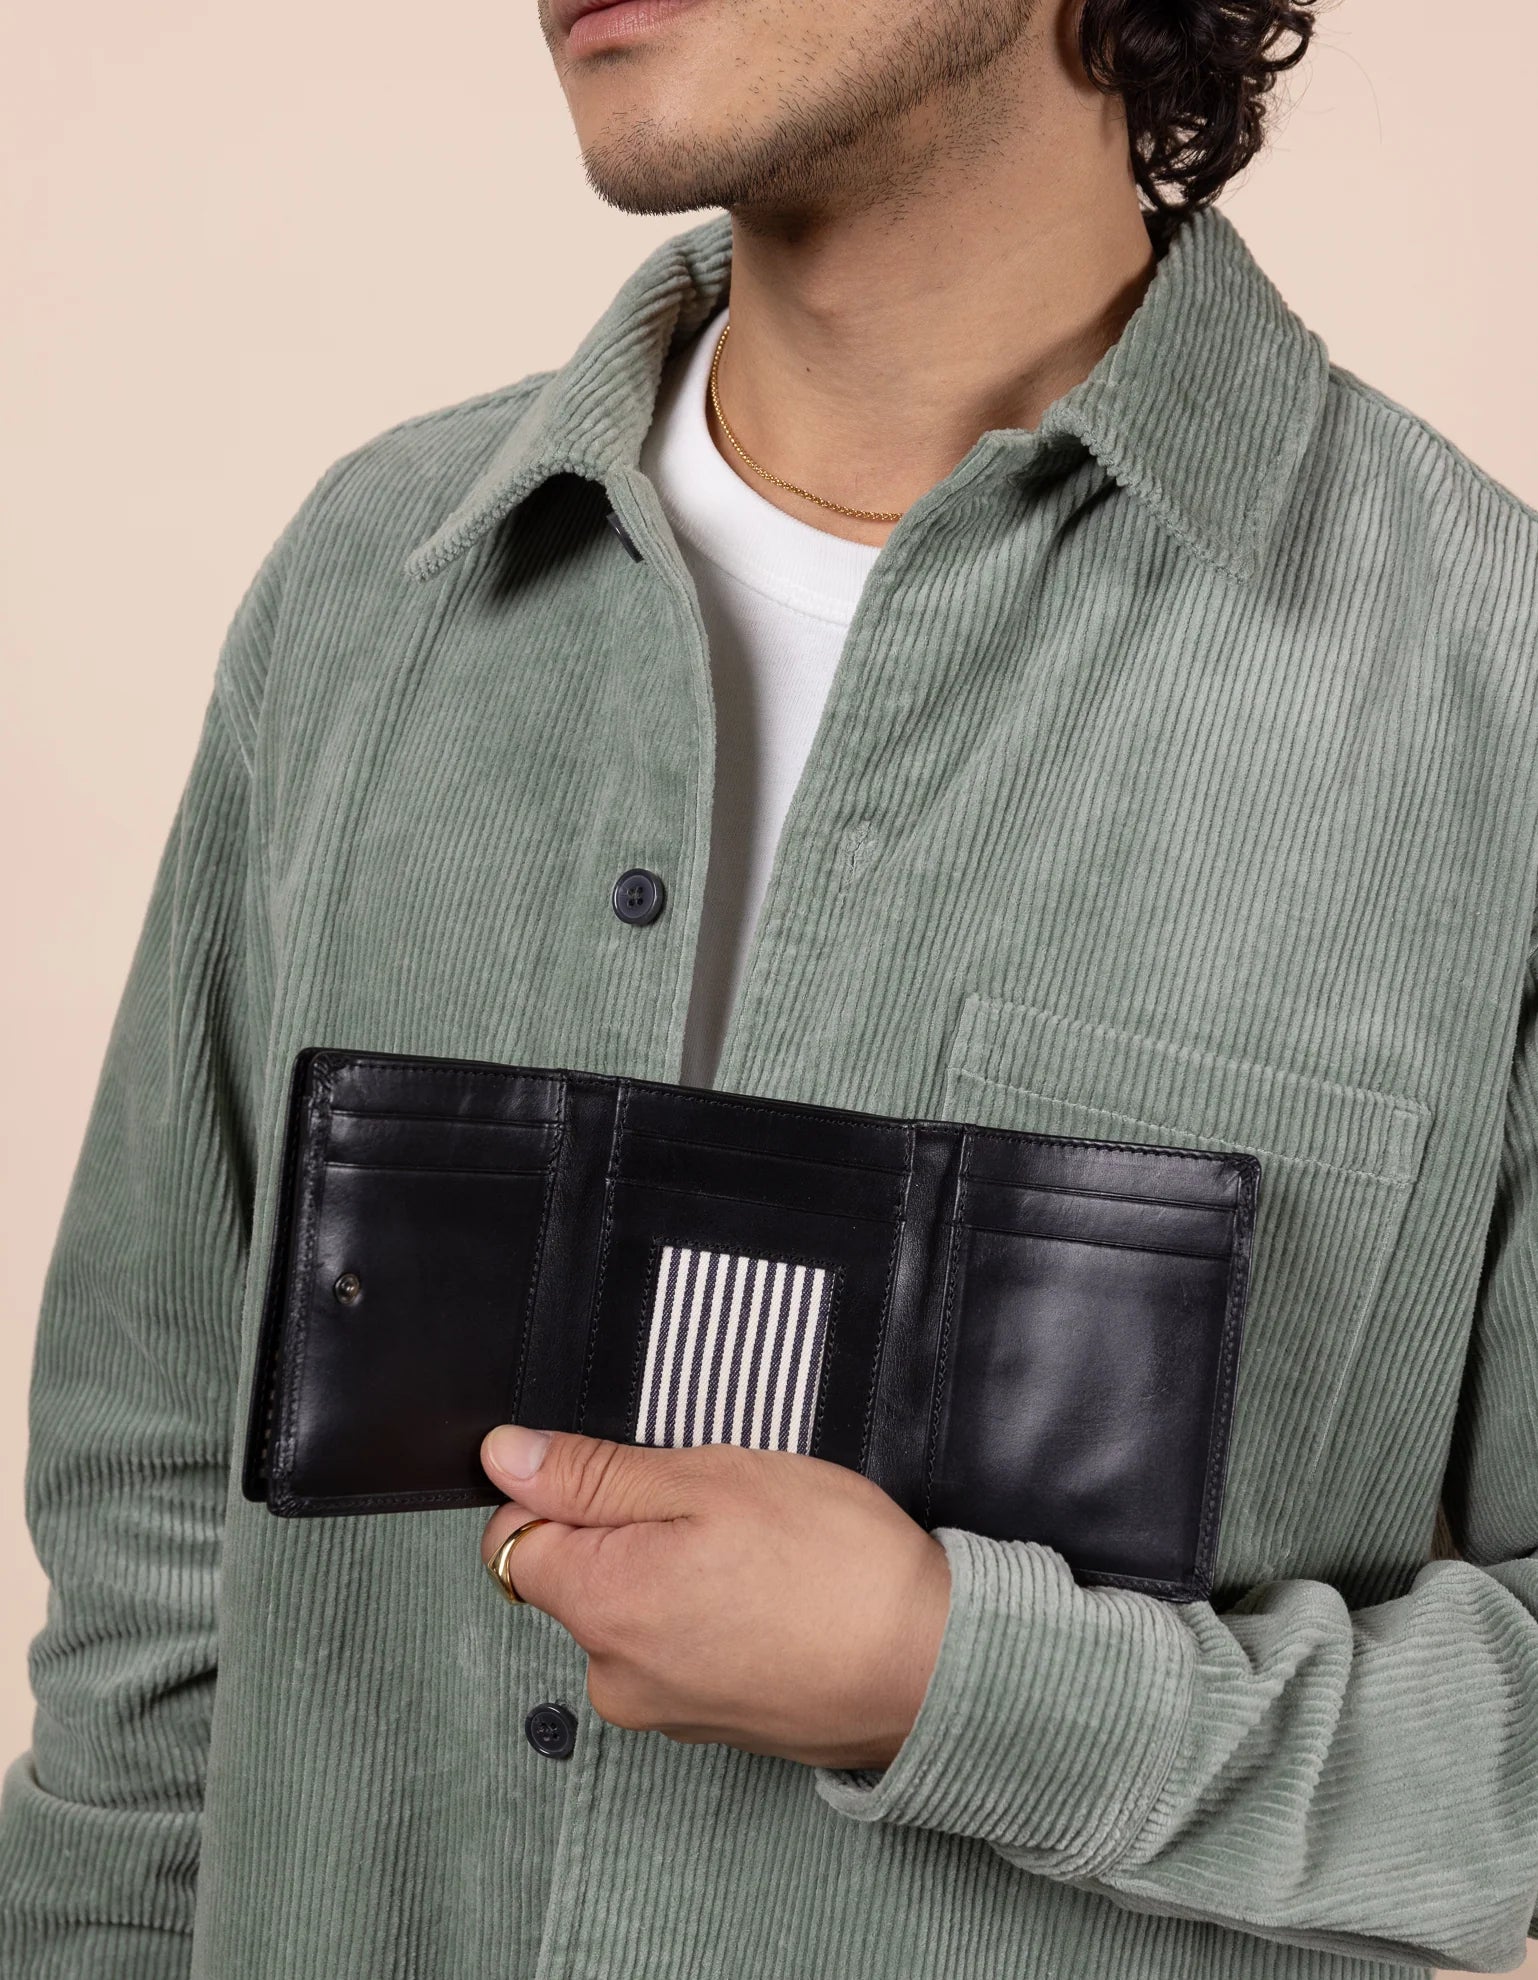 O MY BAG Ollie Wallet Black Classic Leather